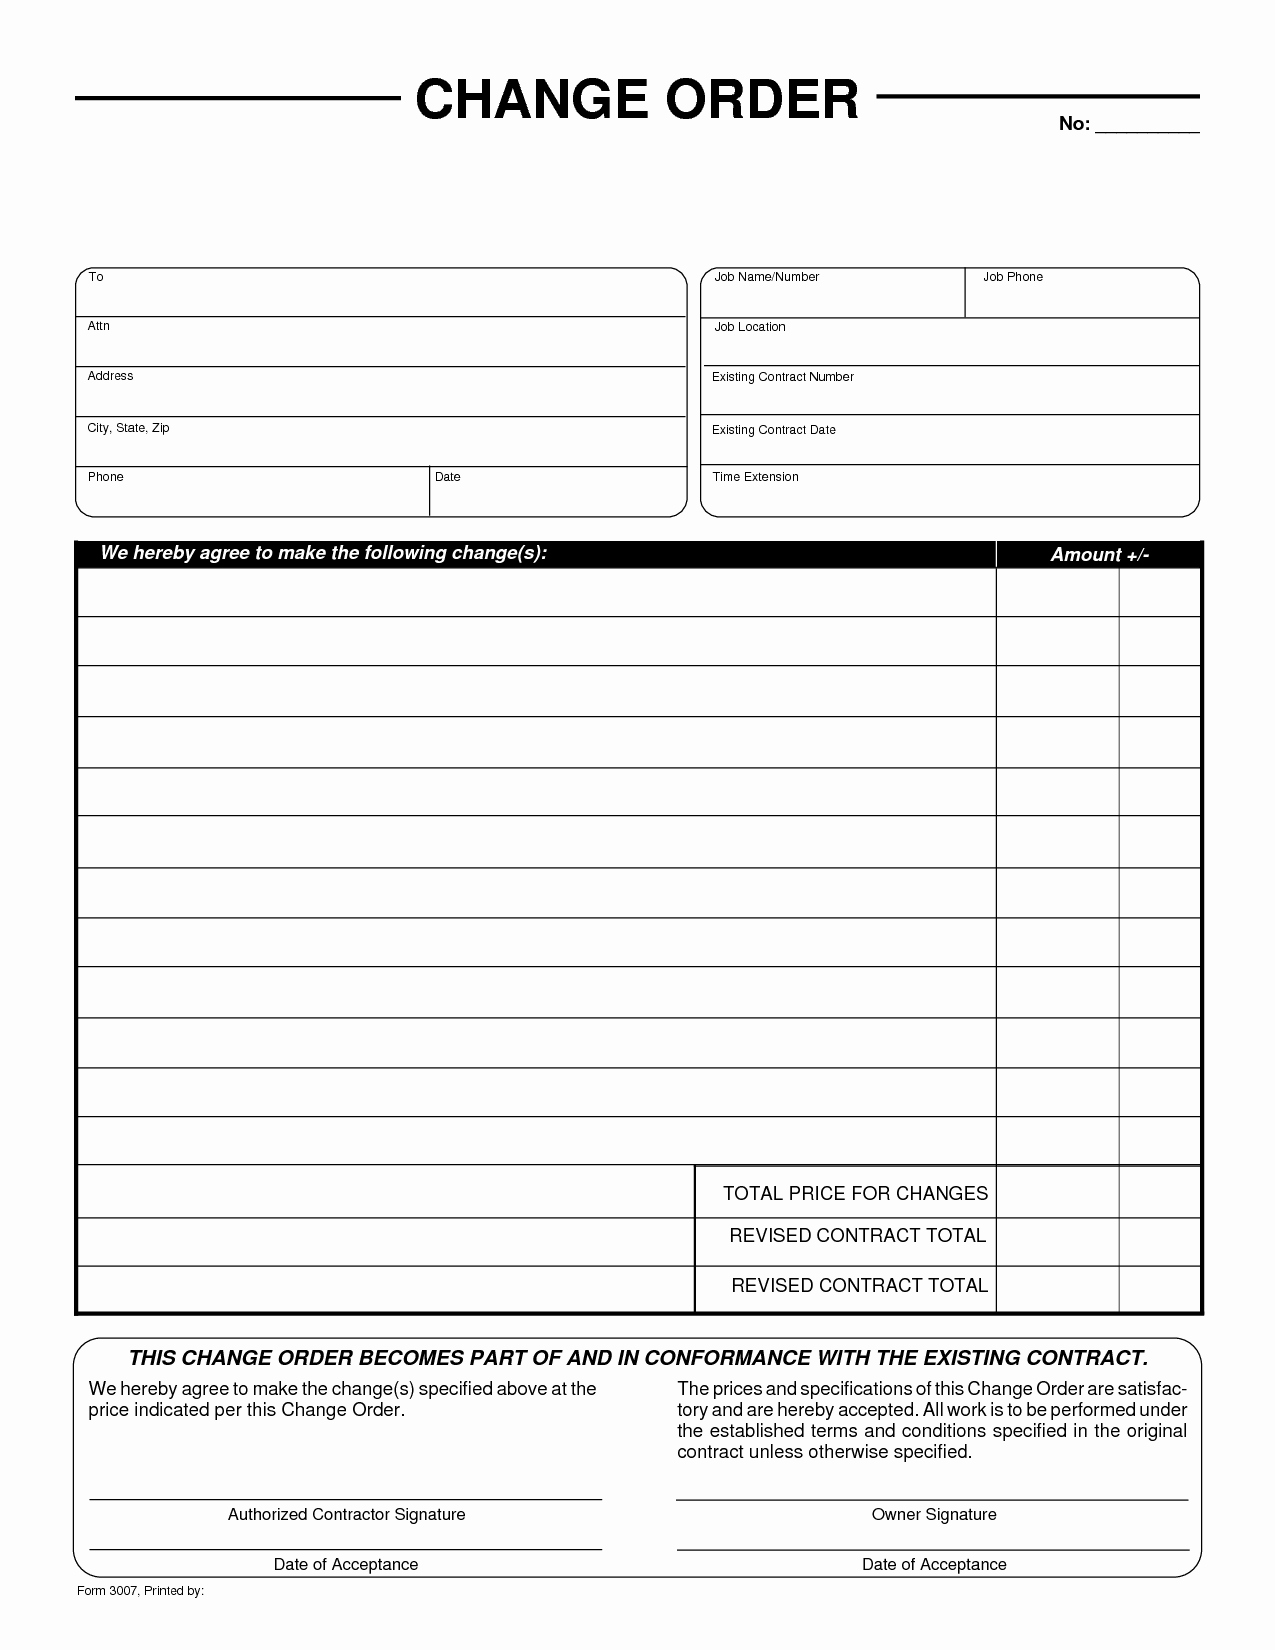 Free order form Template Word Luxury Change Of order form by Liferetreat Change order form